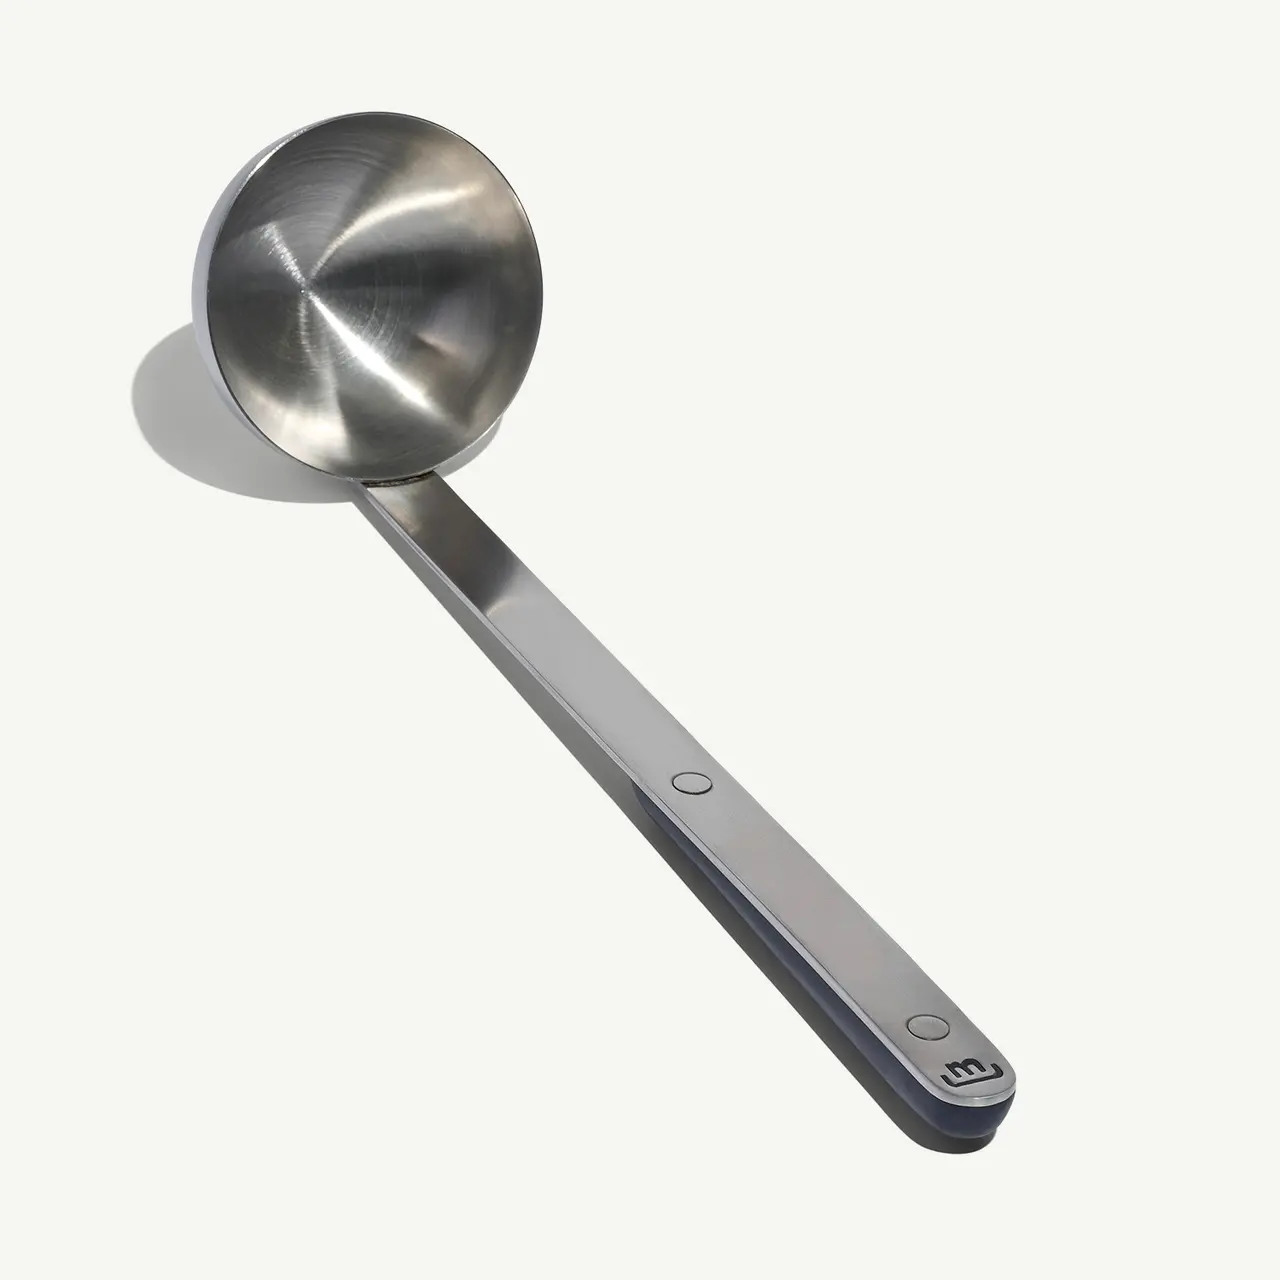 A stainless steel measuring spoon rests on a light background.